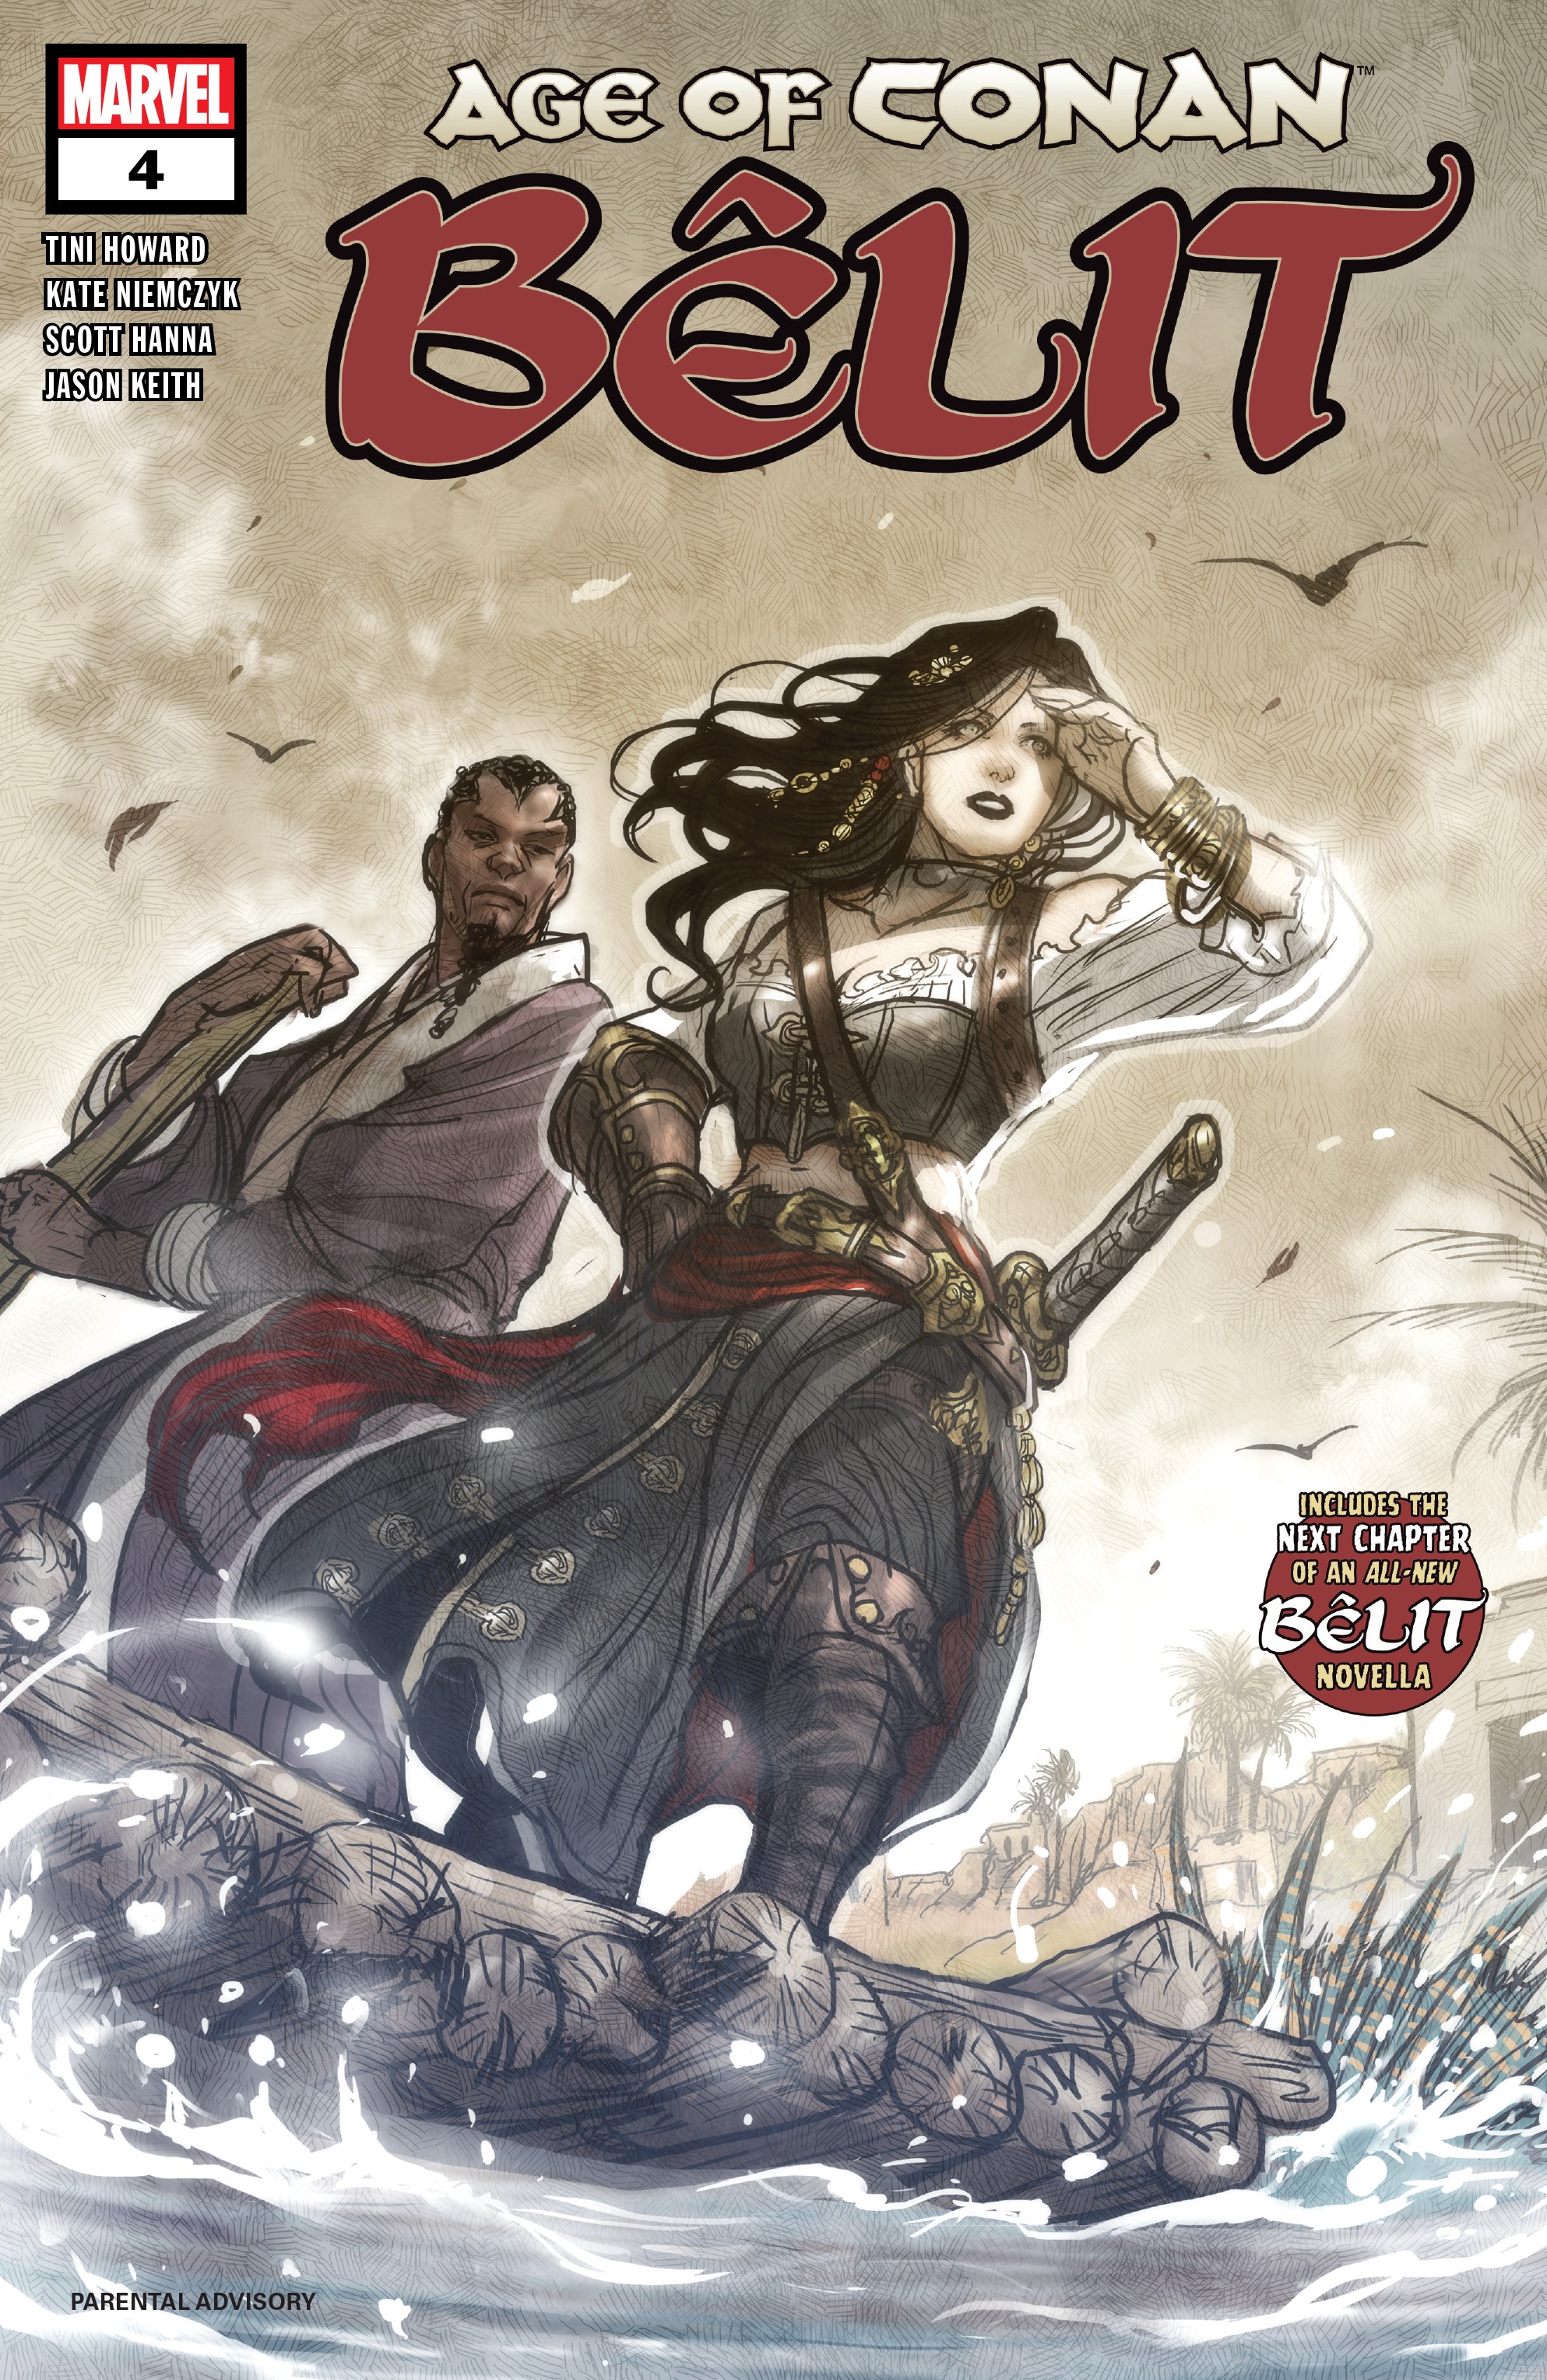 Age of Conan: Belit, Queen of the Black Coast 4 Page 1